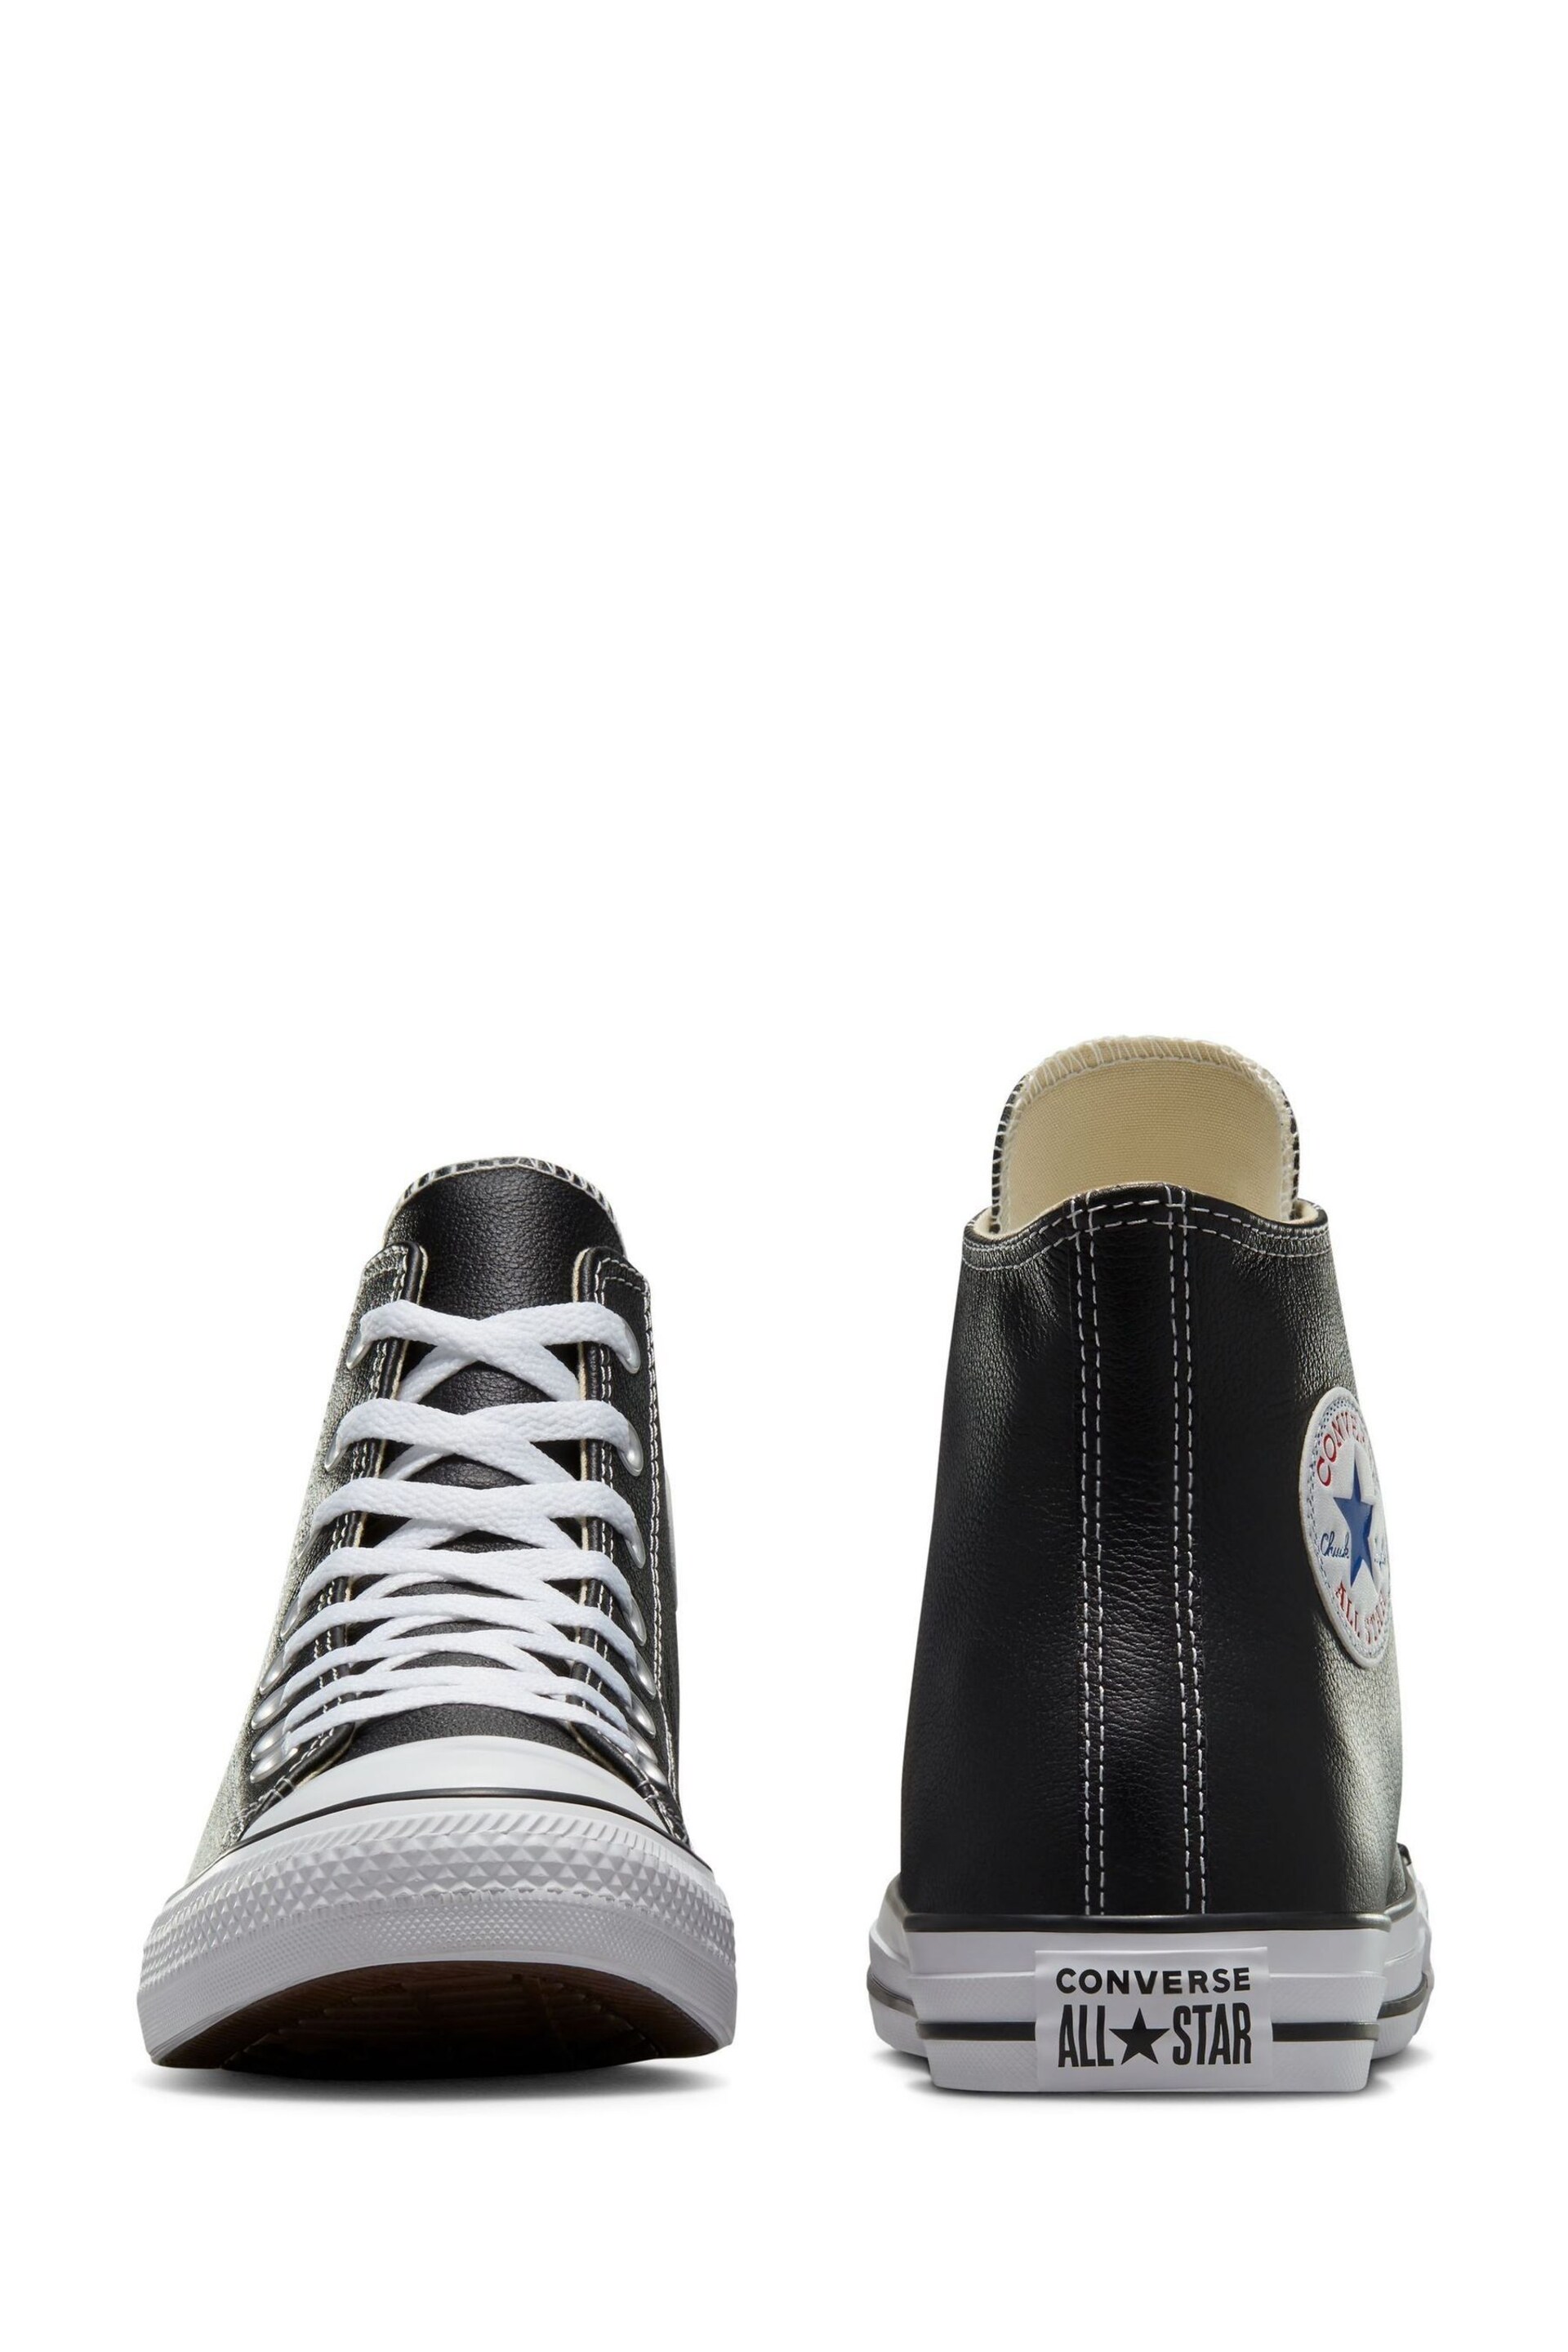 Converse Black Leather Chuck Taylor All Star High Top Trainers - Image 9 of 11